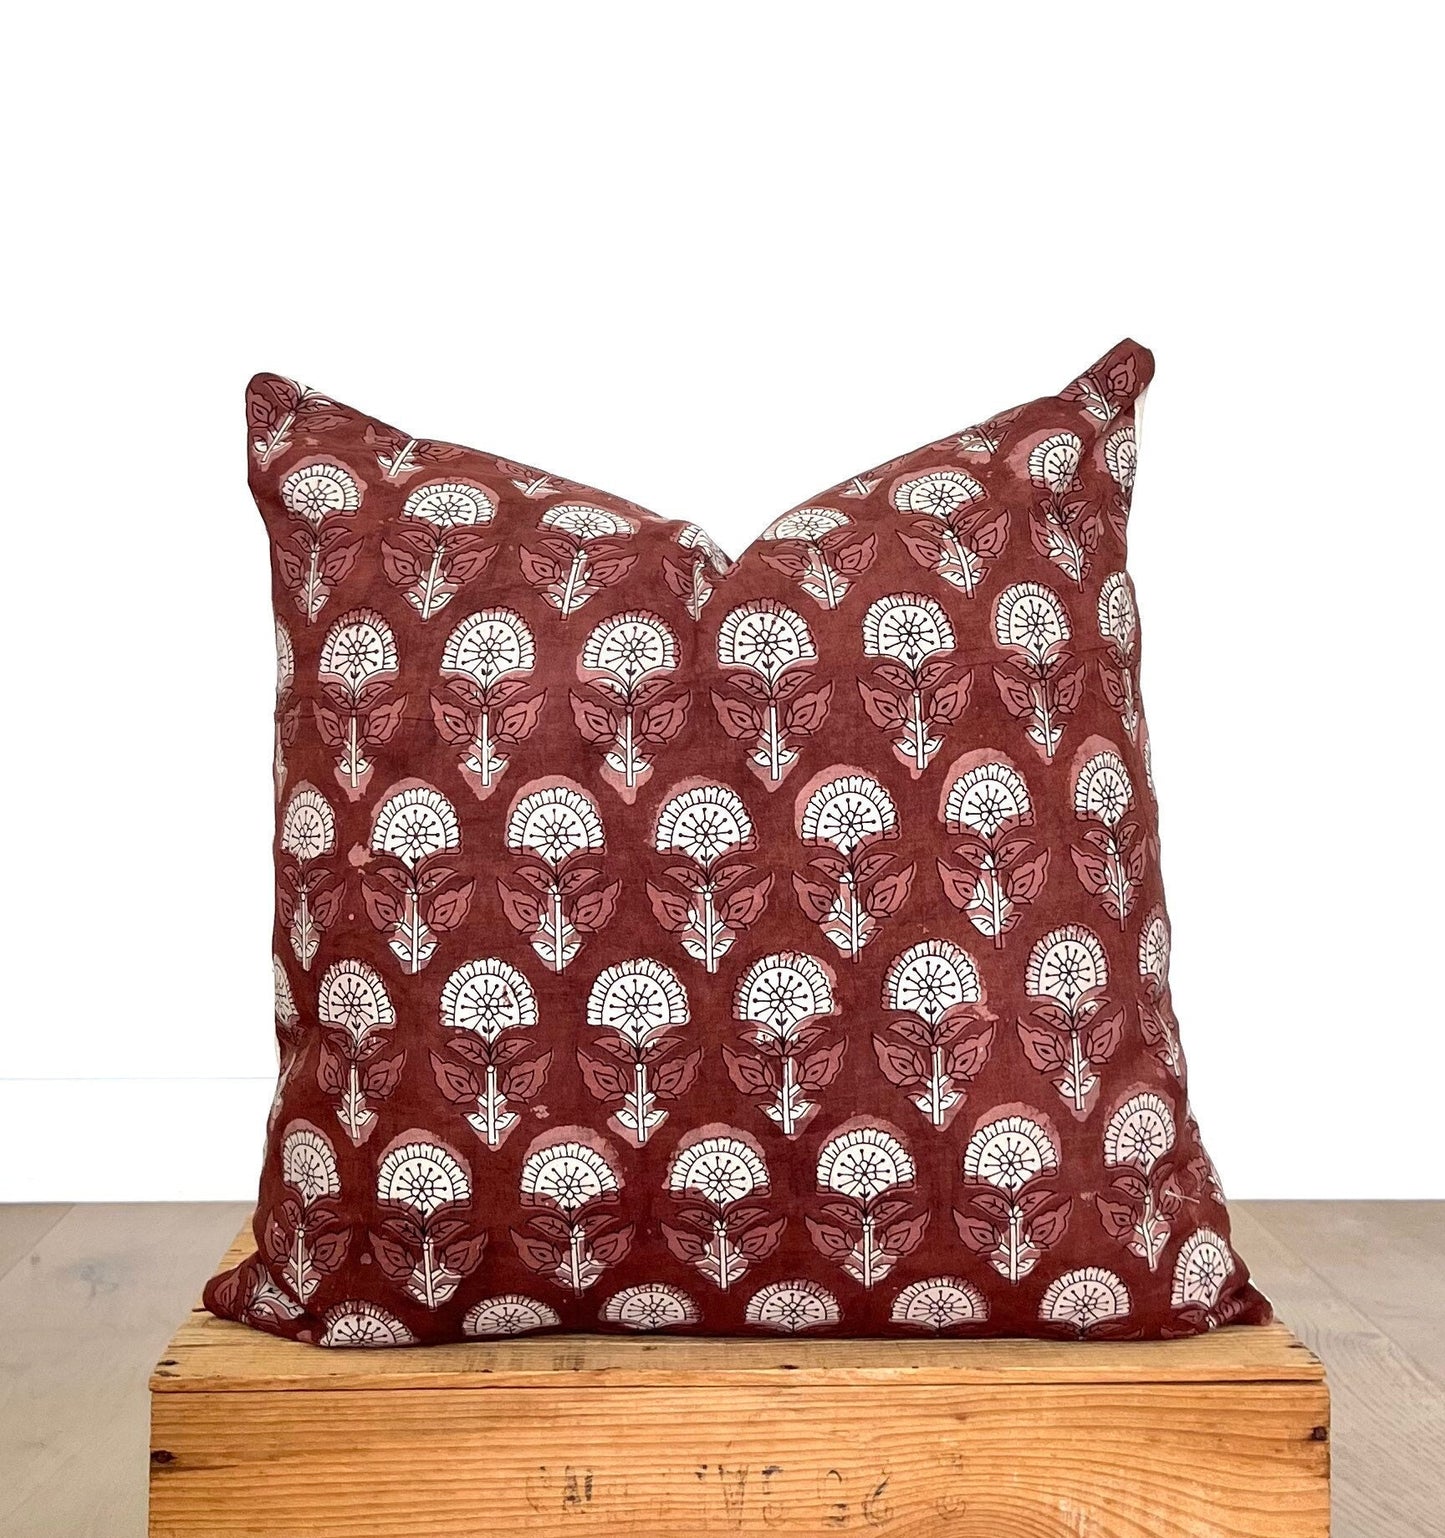 Indian Block Print Pillow Cover Brown/Wine Color